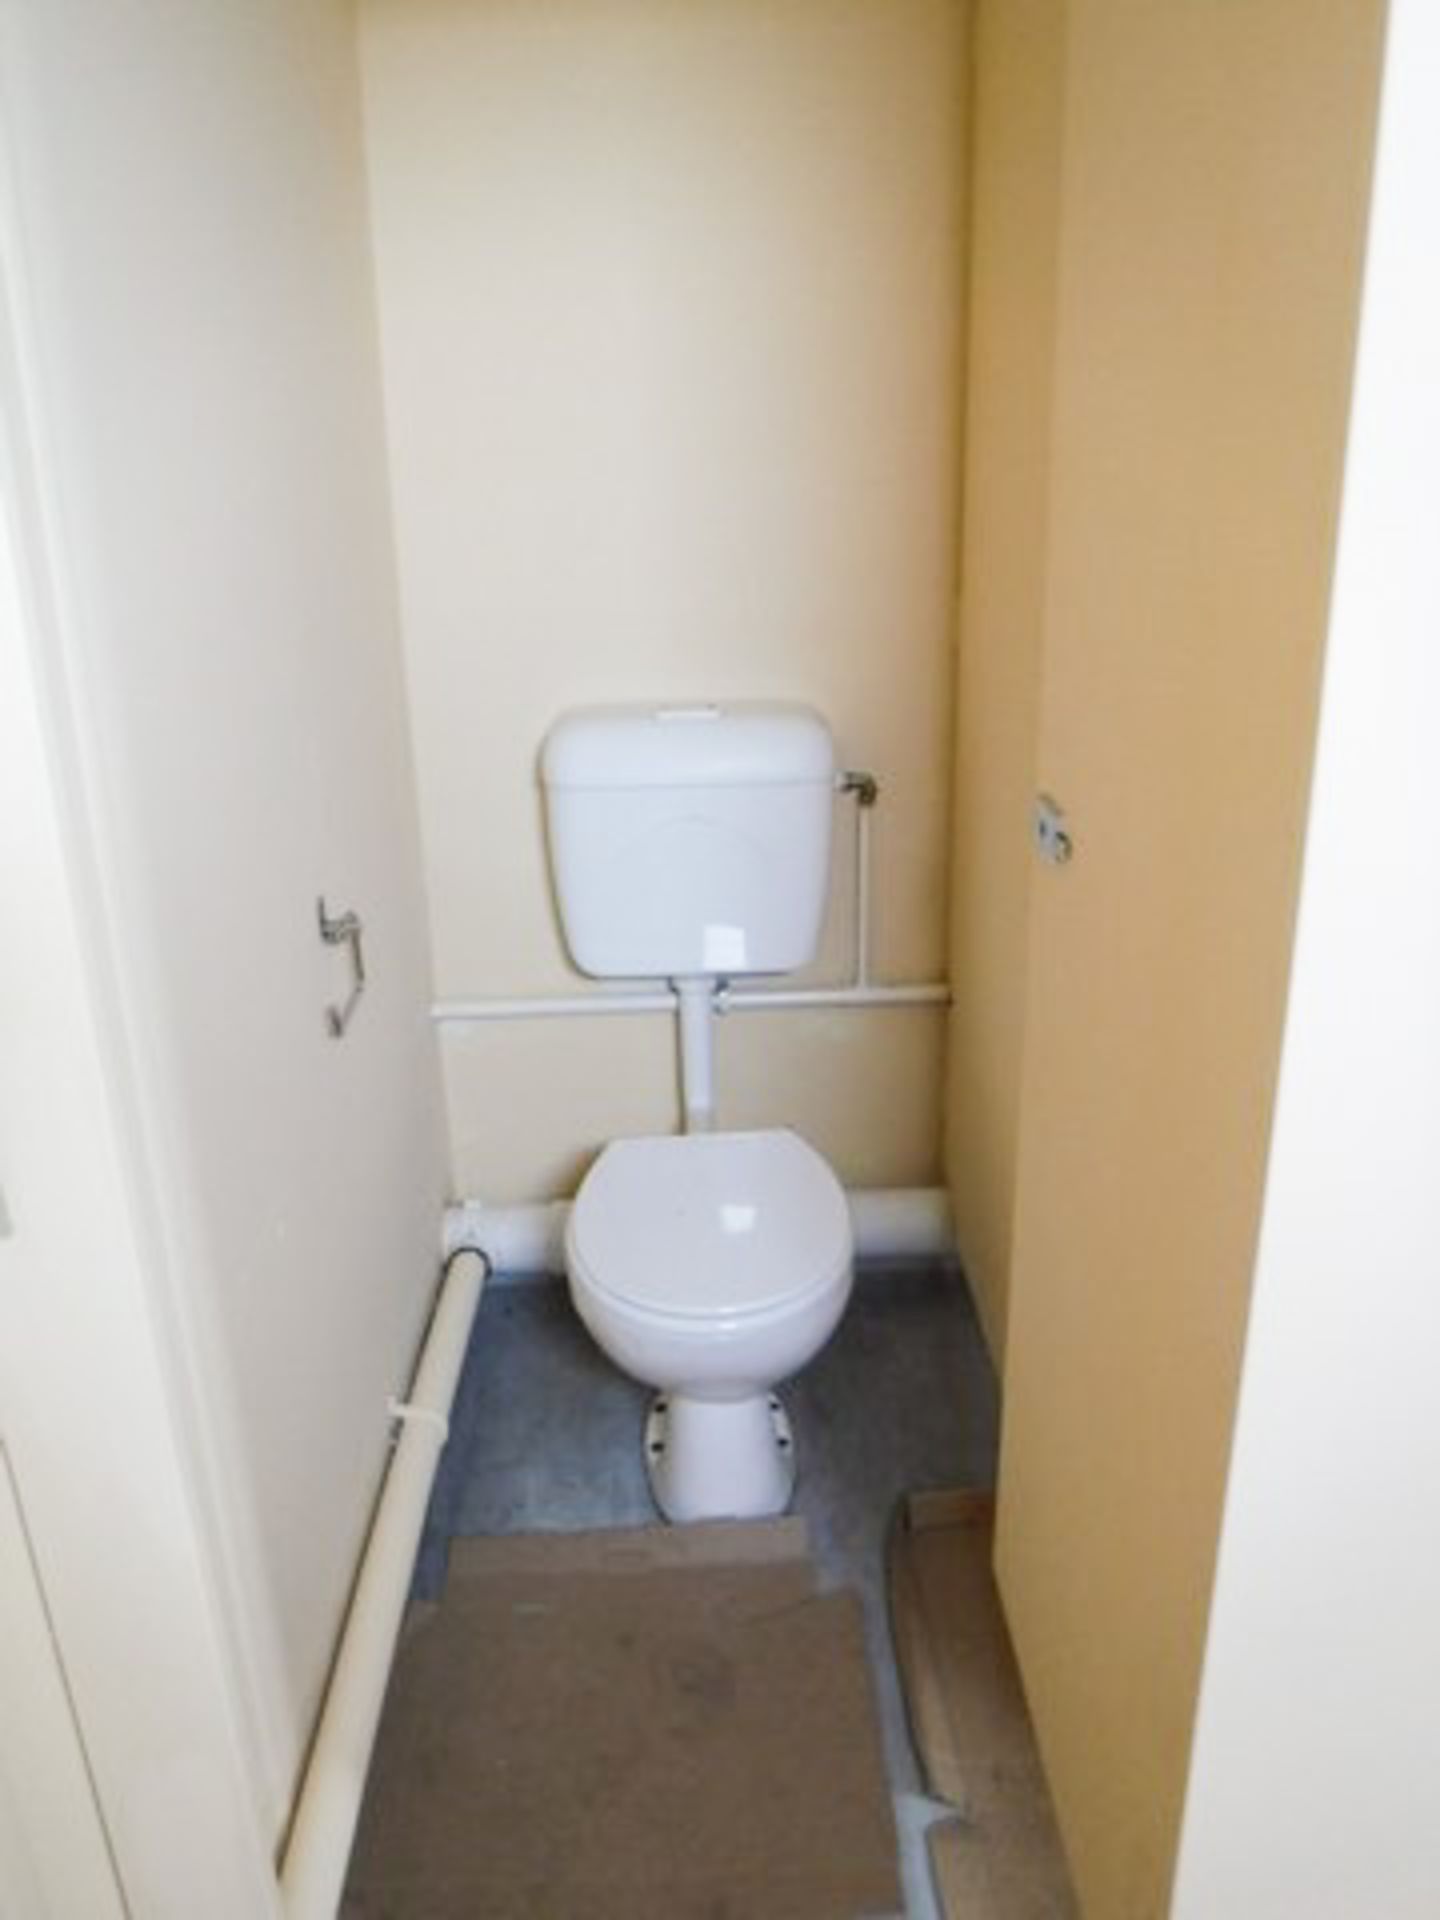 40 X 10 TOILET BLOCK, C/W 10 CUBICALS, 10 URINALS, 9 SINKS, WATER HEATERS TEMP CONTROLLED ANTI-FREEZ - Image 8 of 9